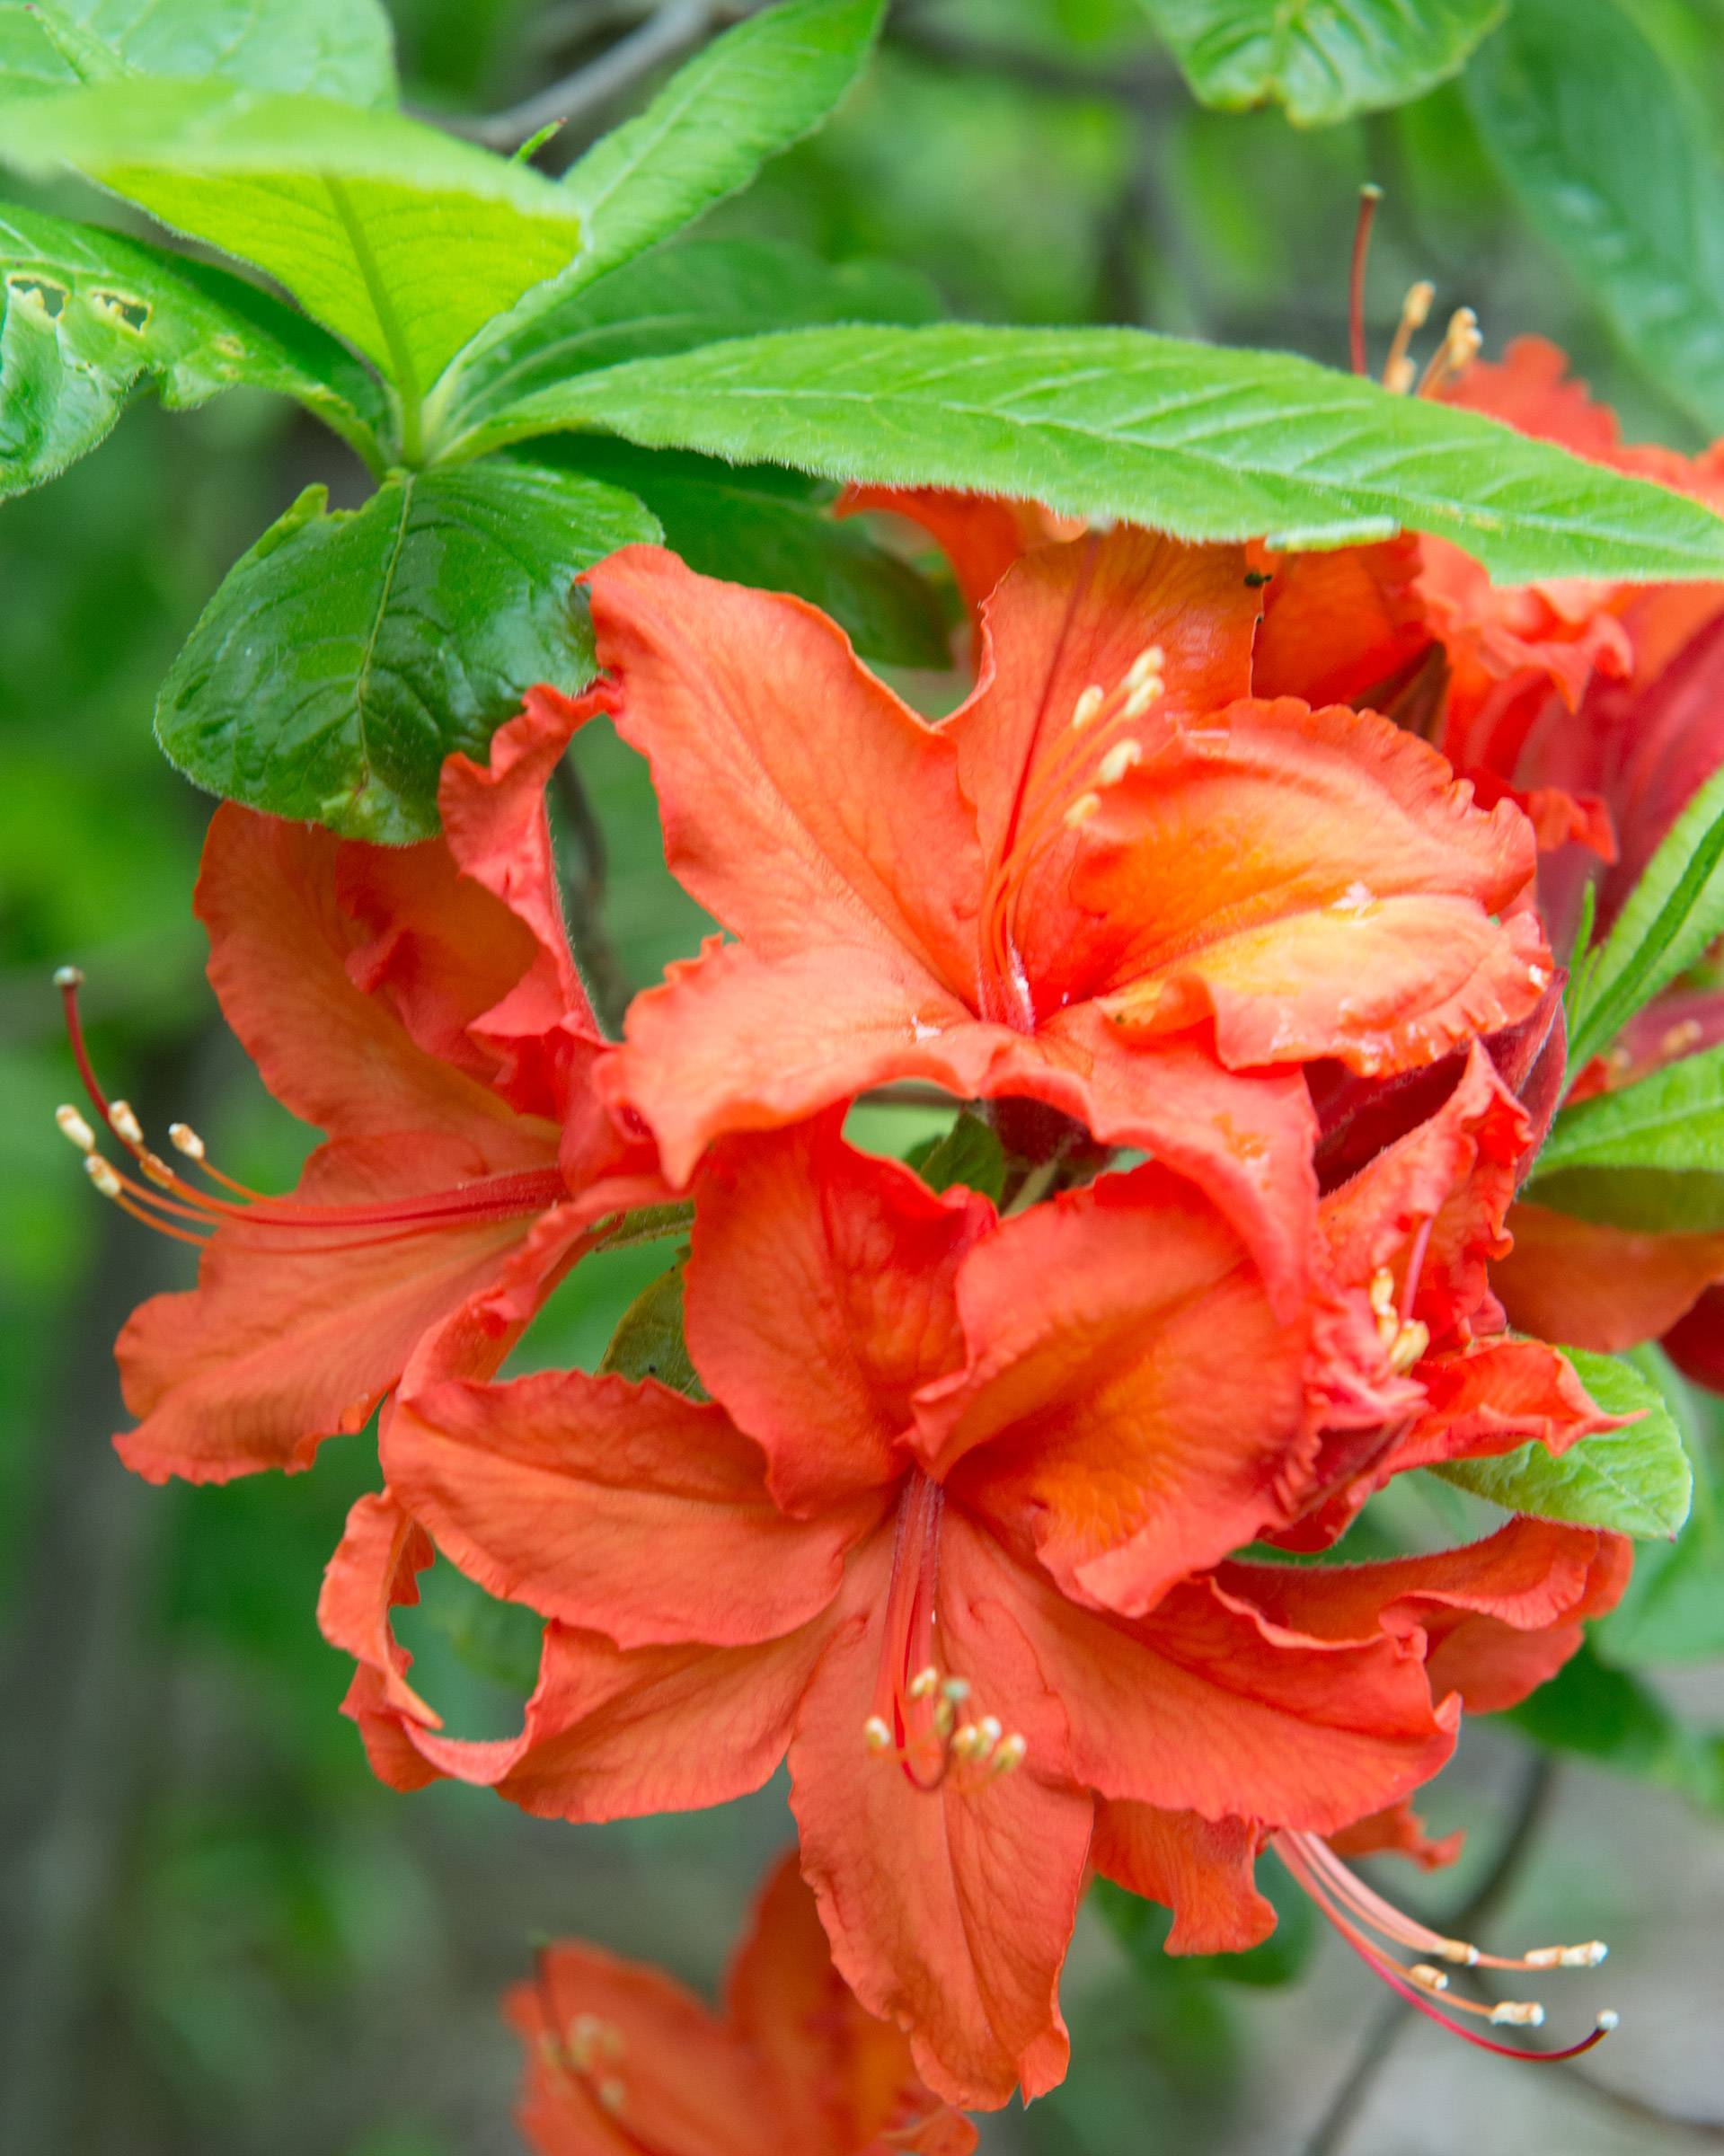 red-orange flowers with orange filaments, yellow anthers, lime-green leaves and brown stems